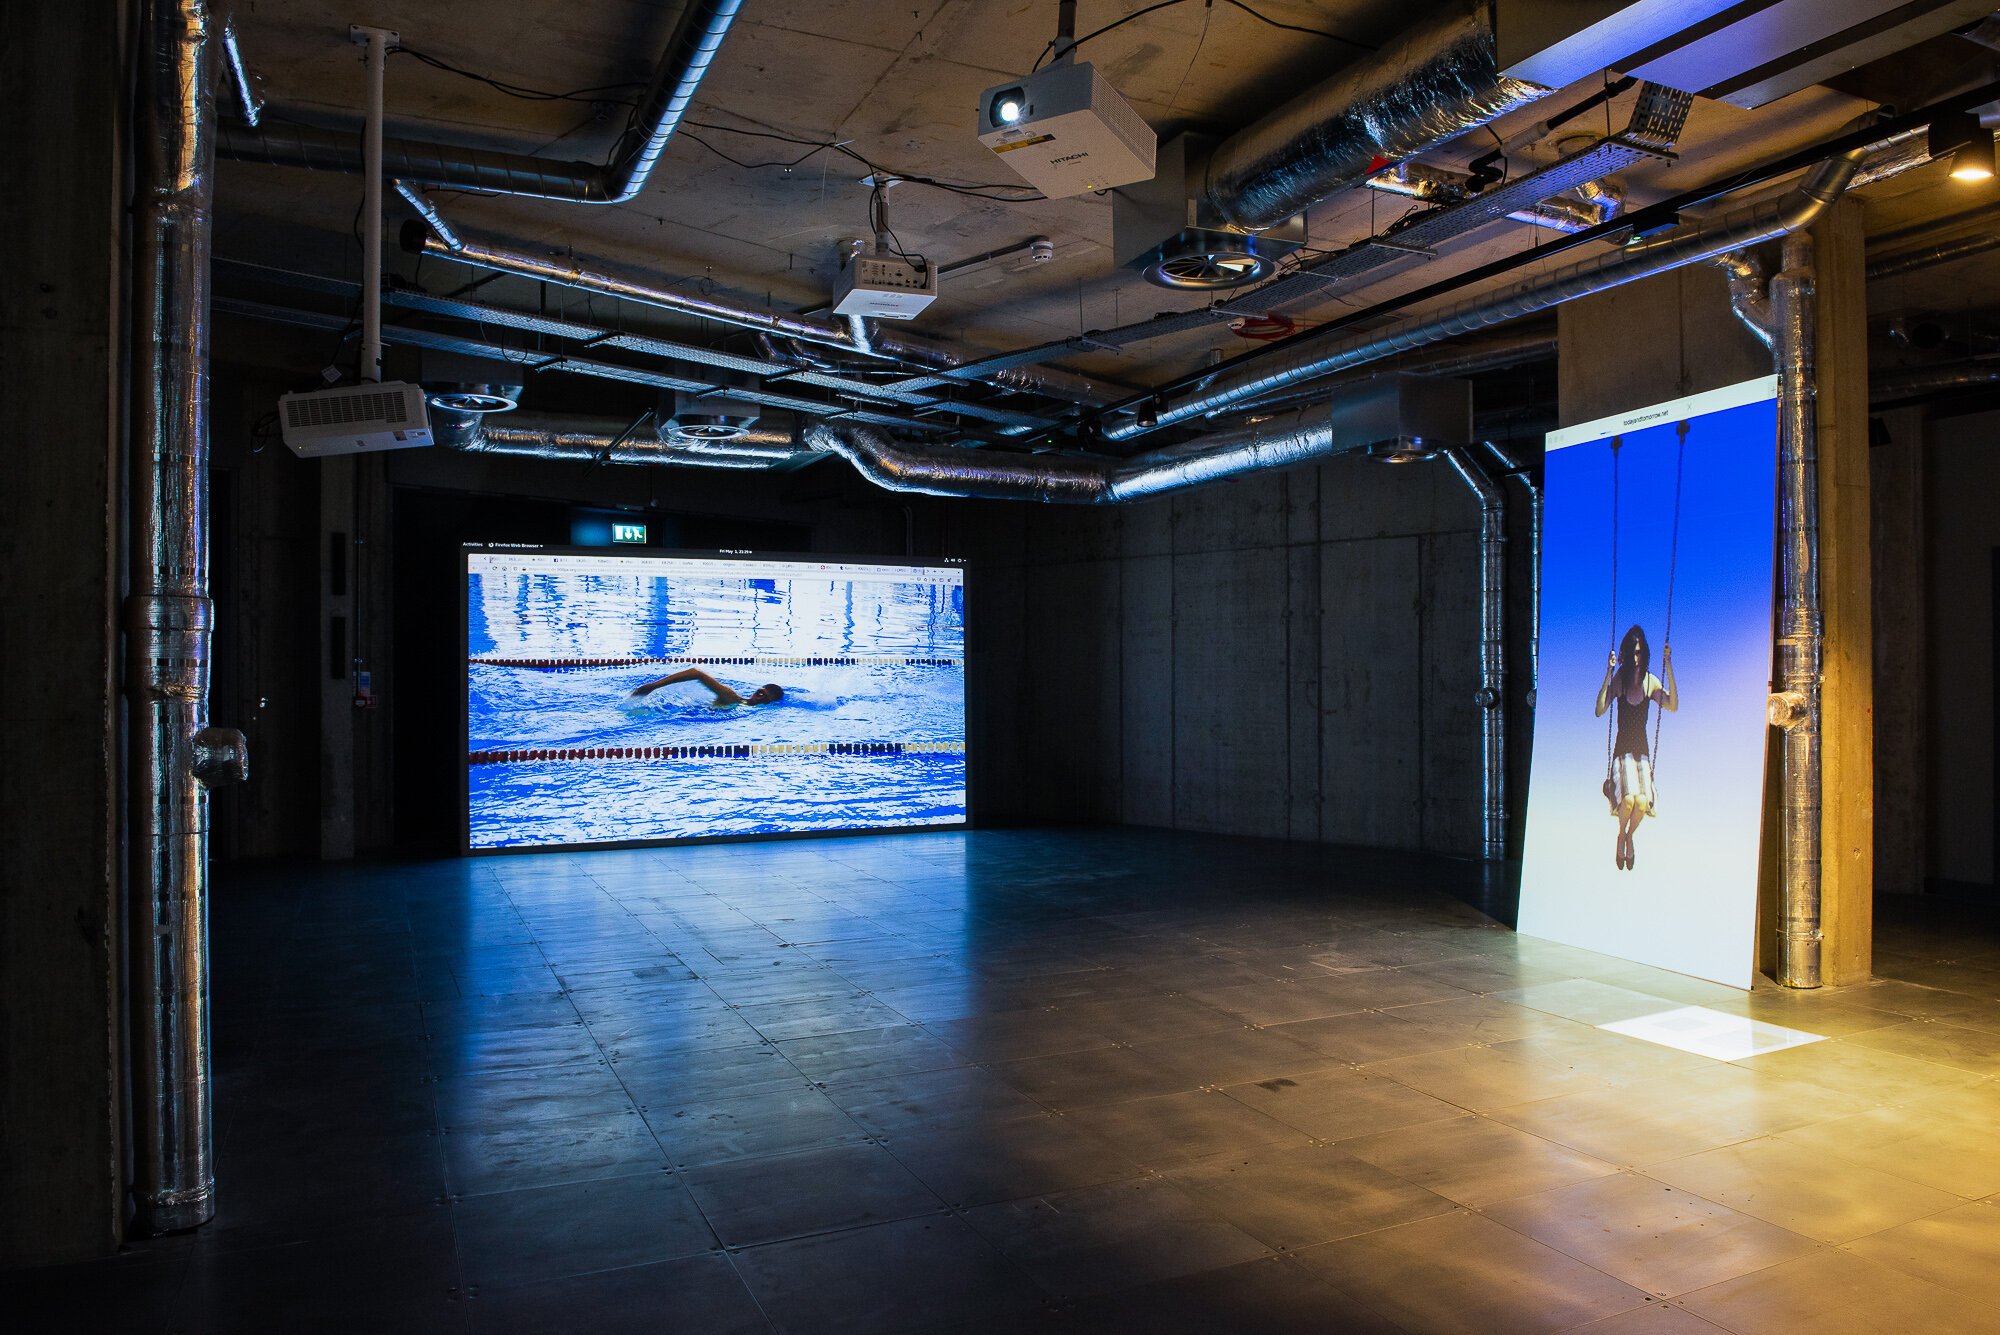 Olia Lialina, Best Effort Network, 2020. Installation view, arebyte Gallery, London. Image: Max Colson.